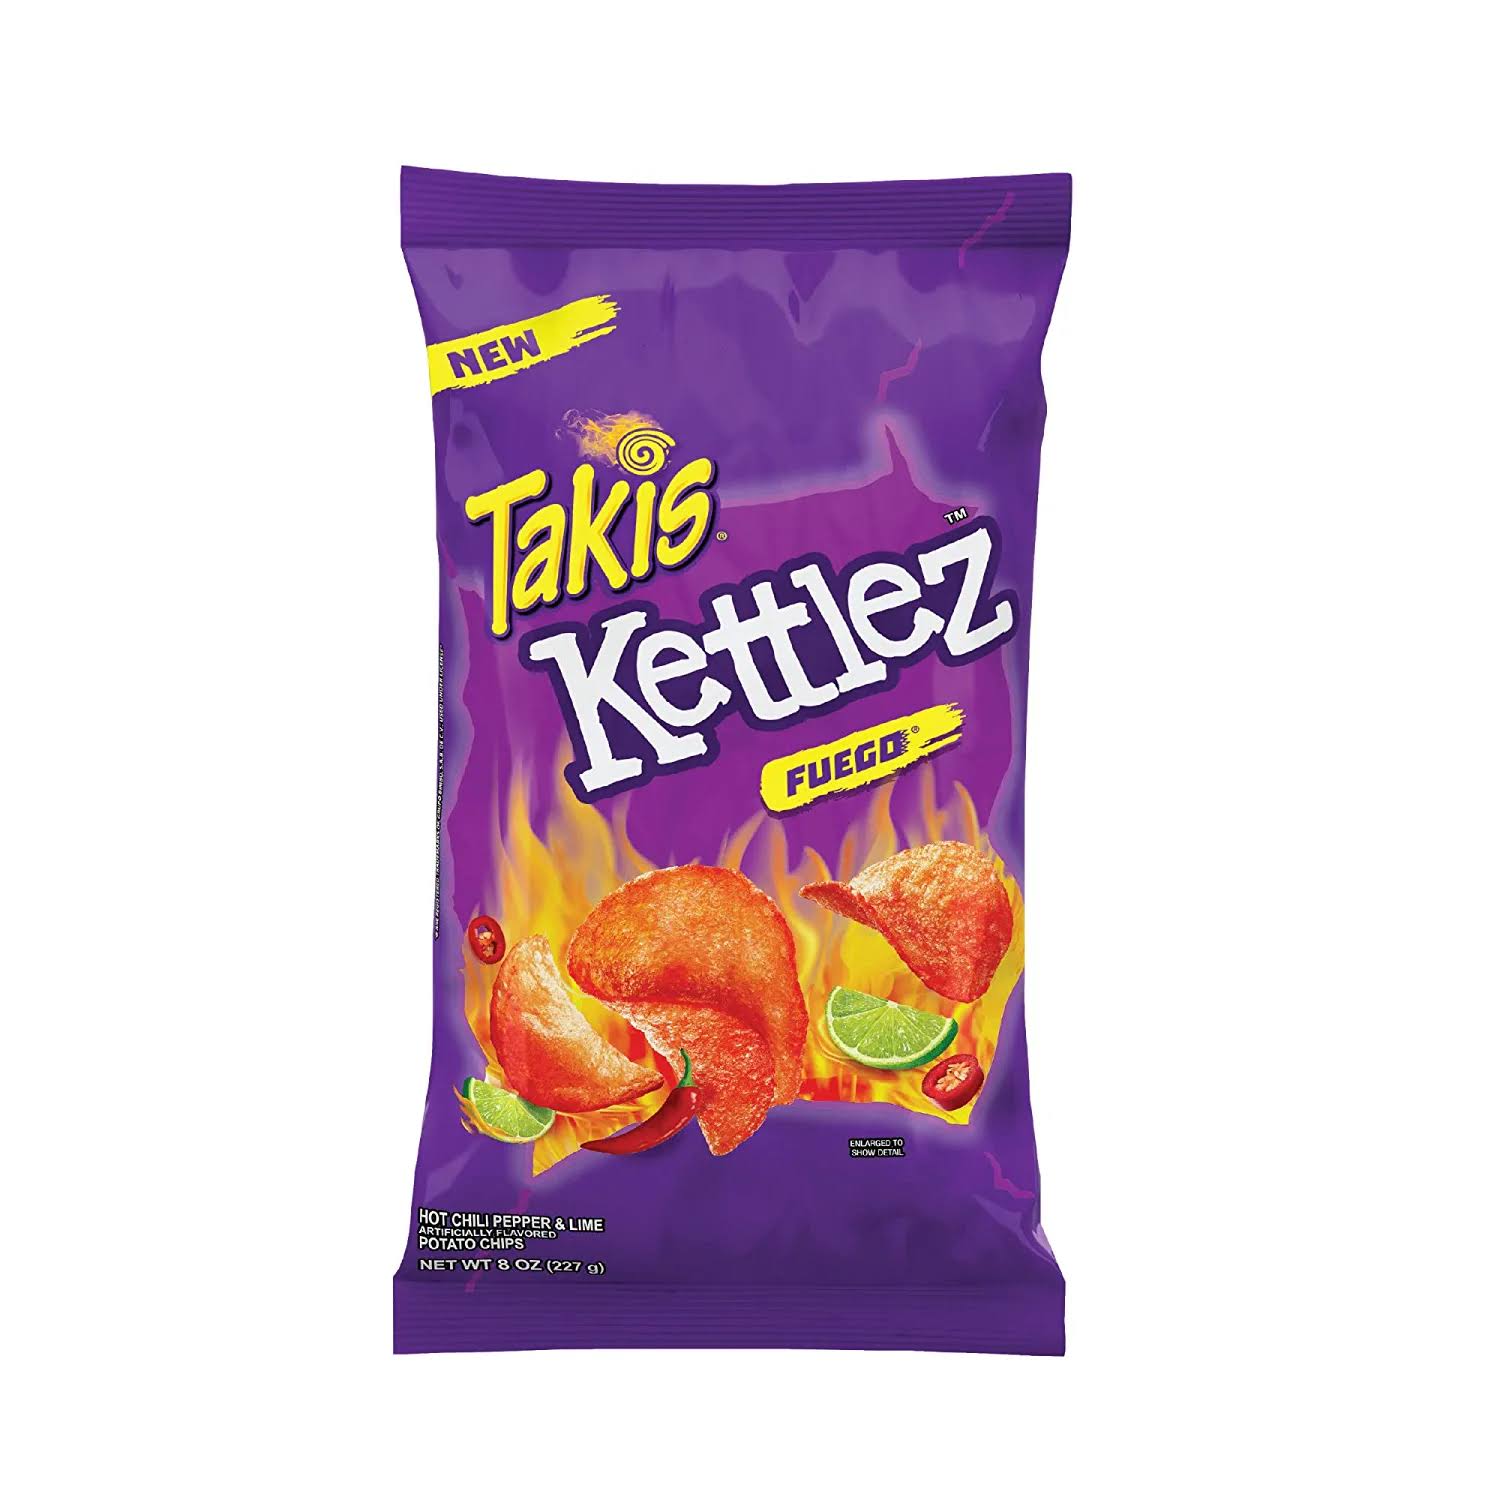 Barcel Kettle Cooked Chips, Fuego, Artisan Style - 8 oz